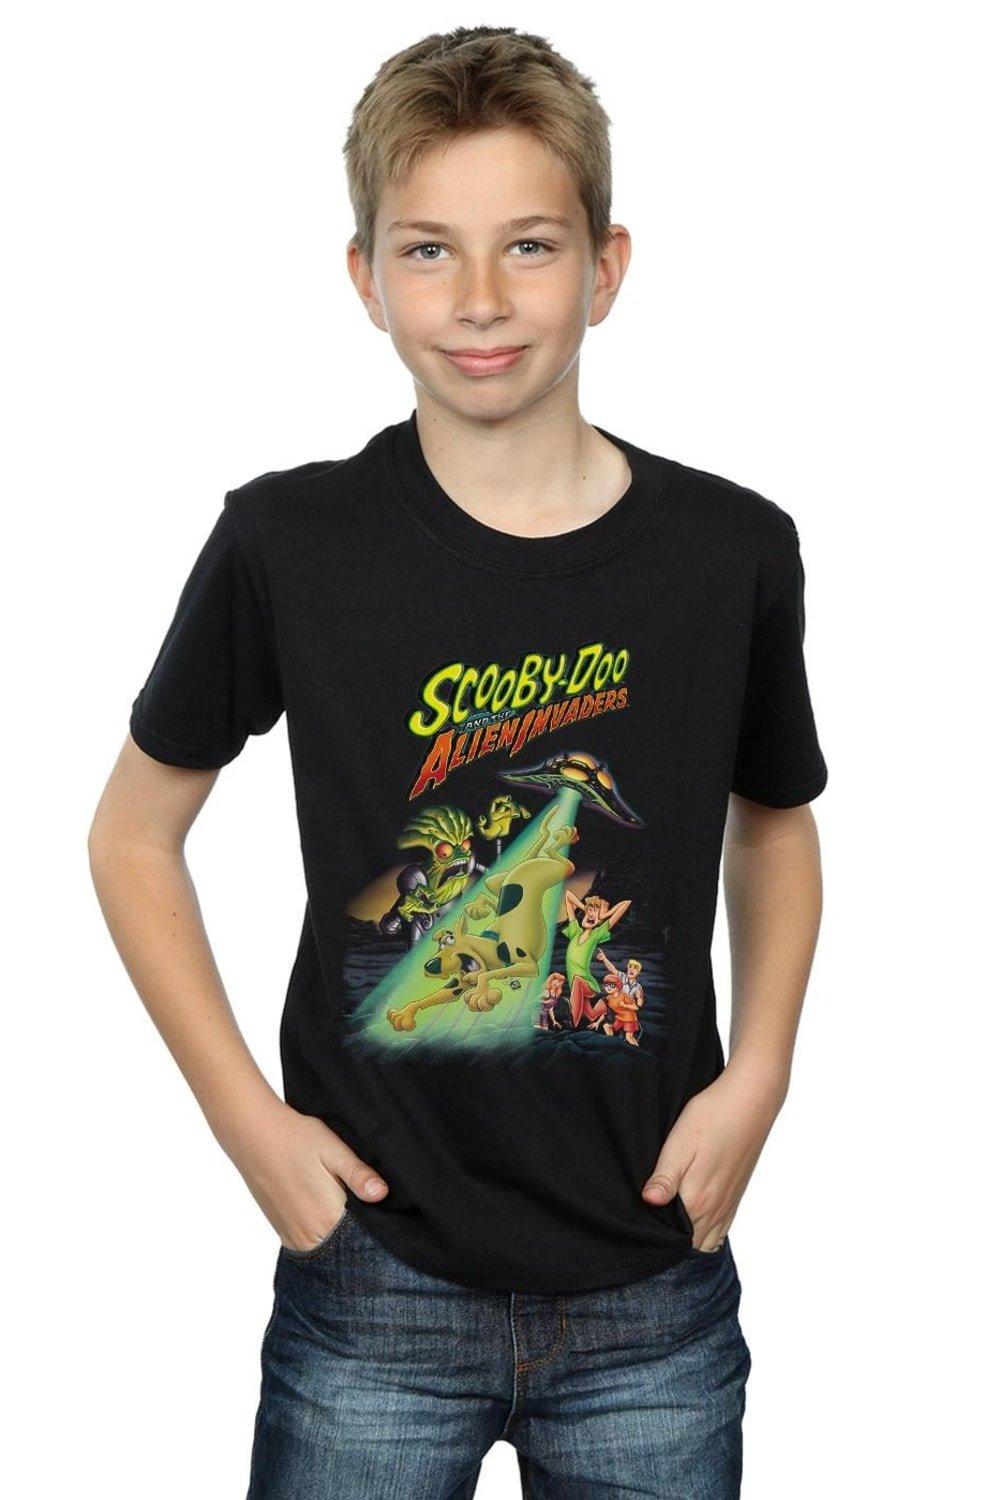 The Alien Invaders Cotton T-Shirt